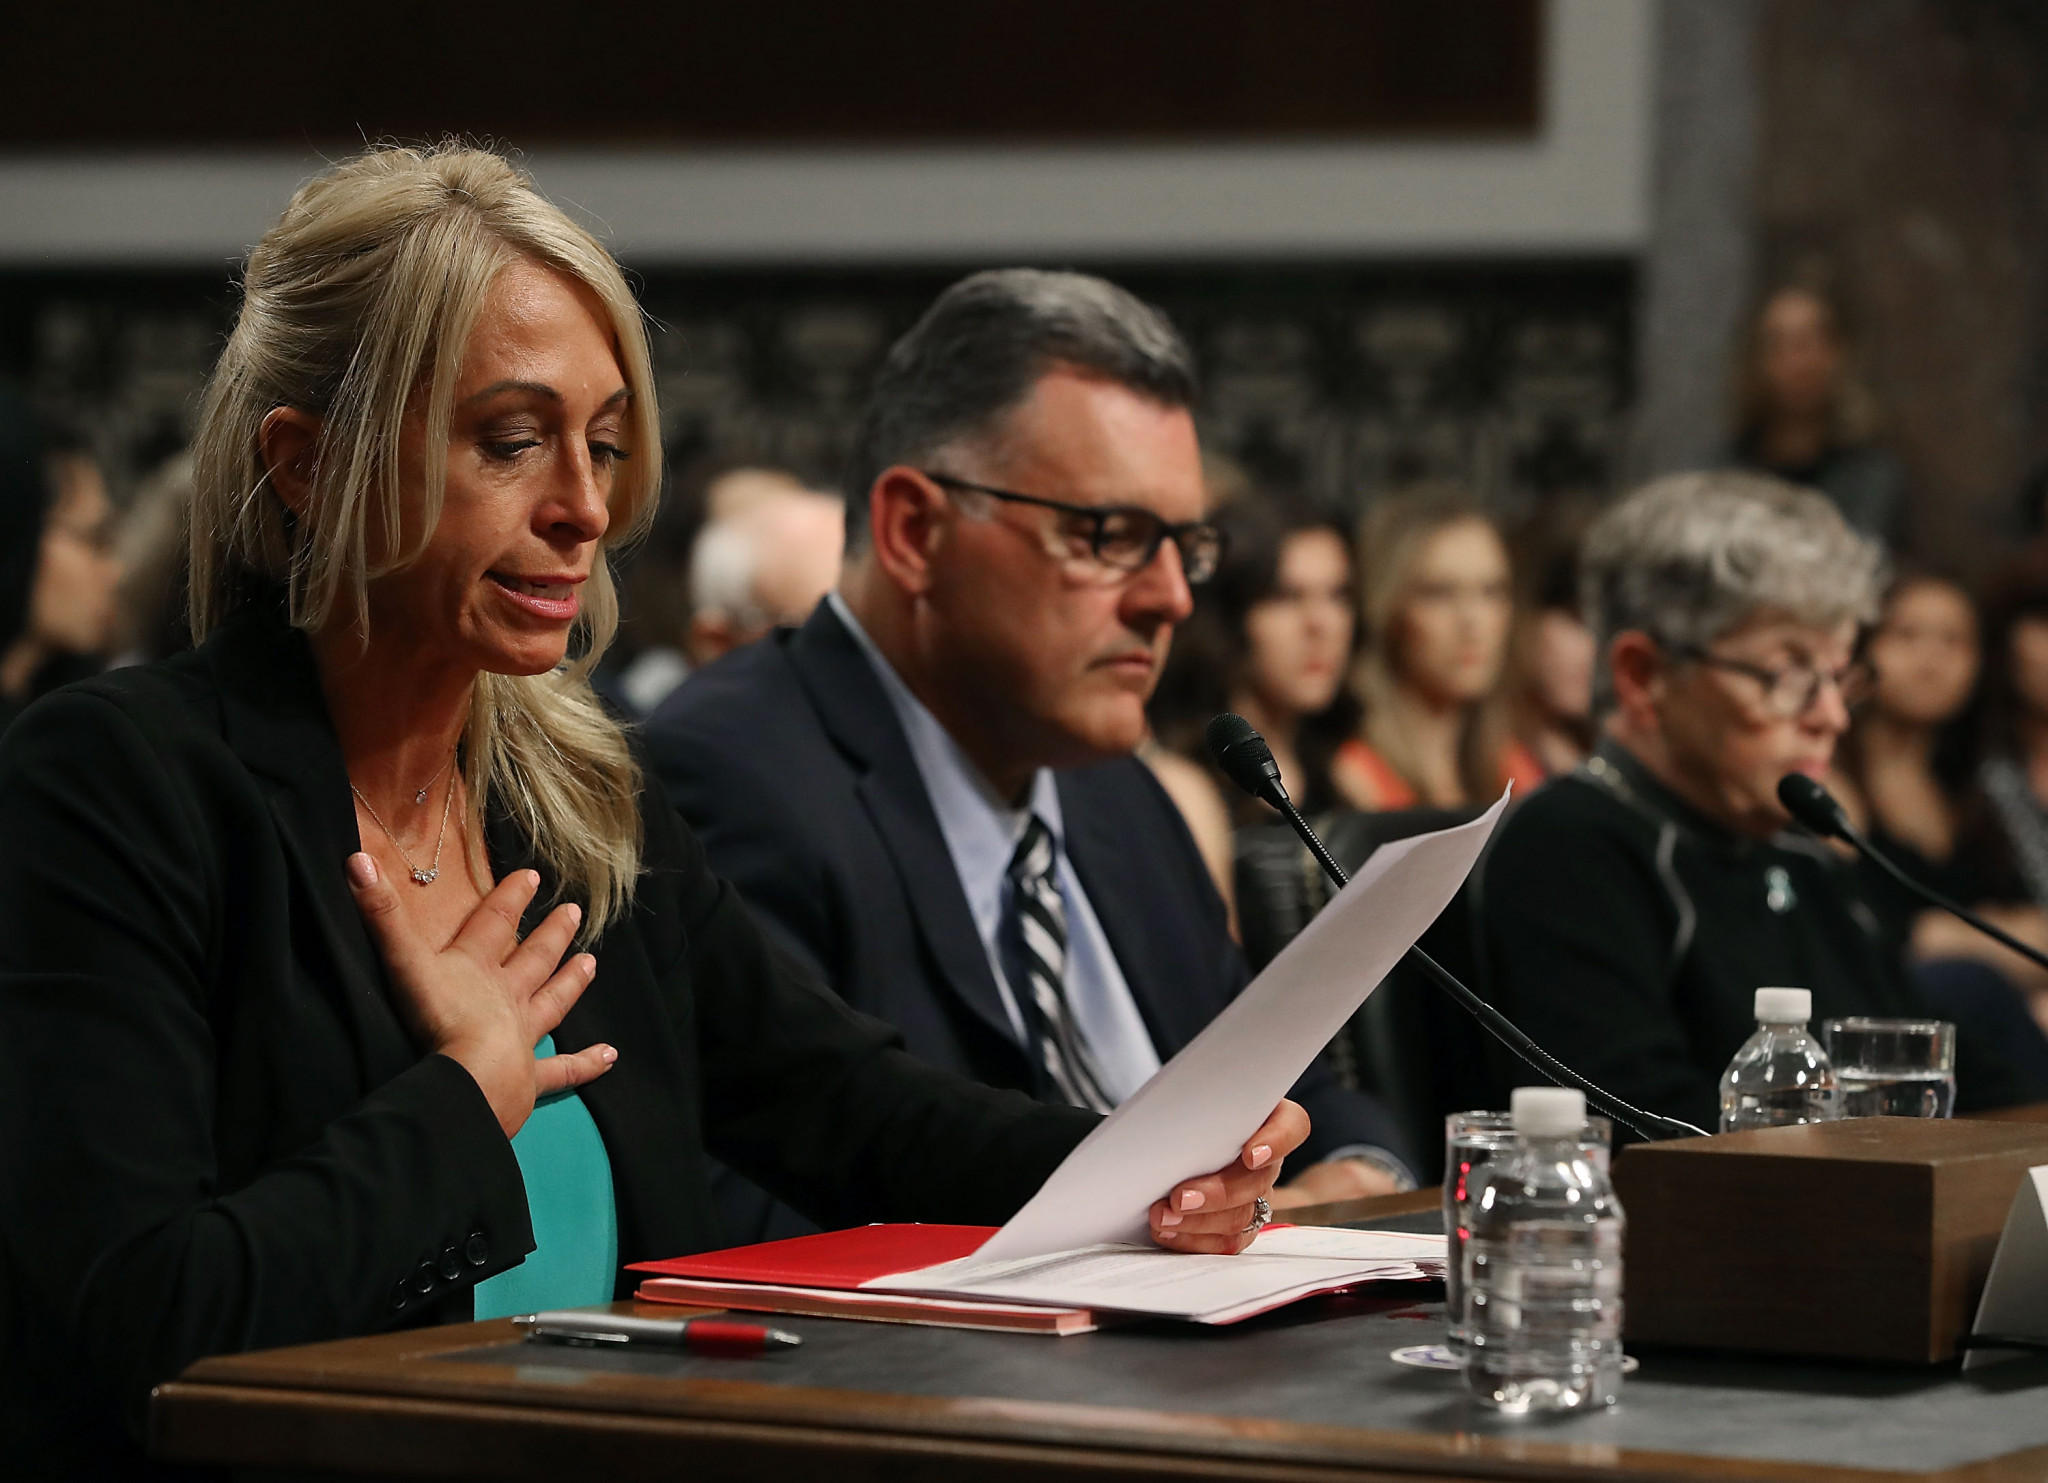 Rhonda Faehn did answer questions at the hearing ©Getty Images